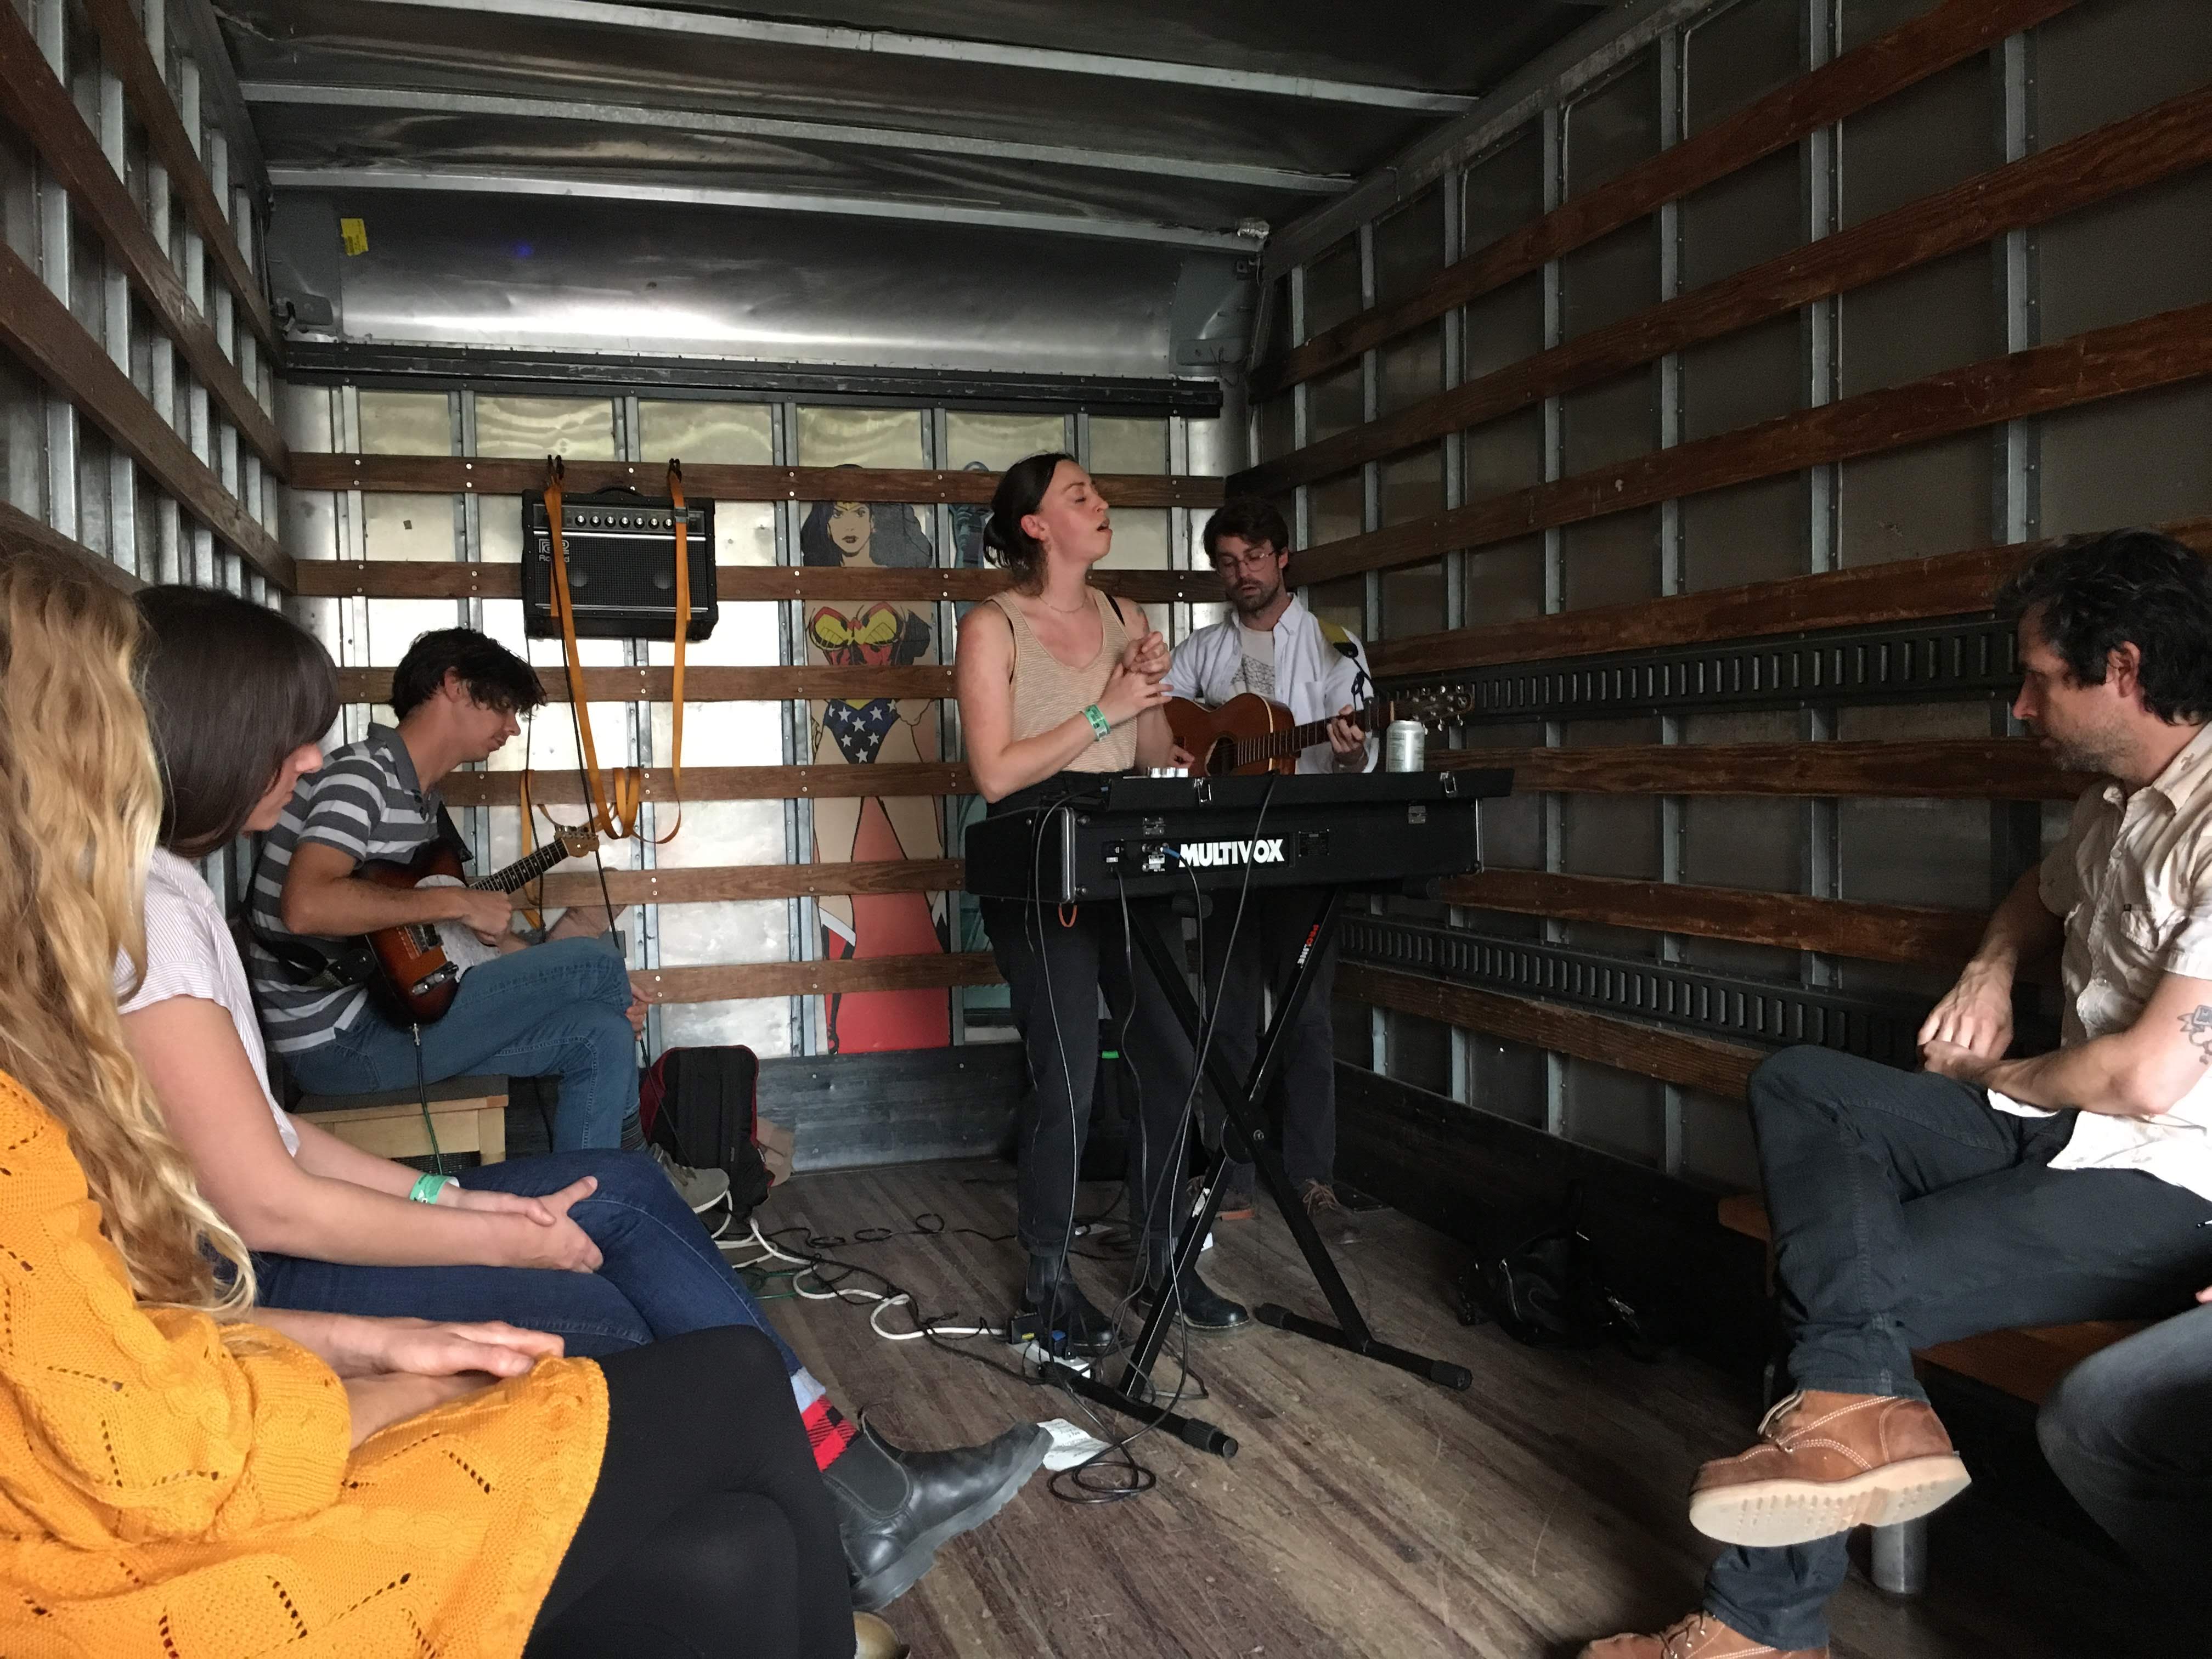 Another awesome band - Sun June, playing a stripped down set in the back of a moving truck during
South By Southwest